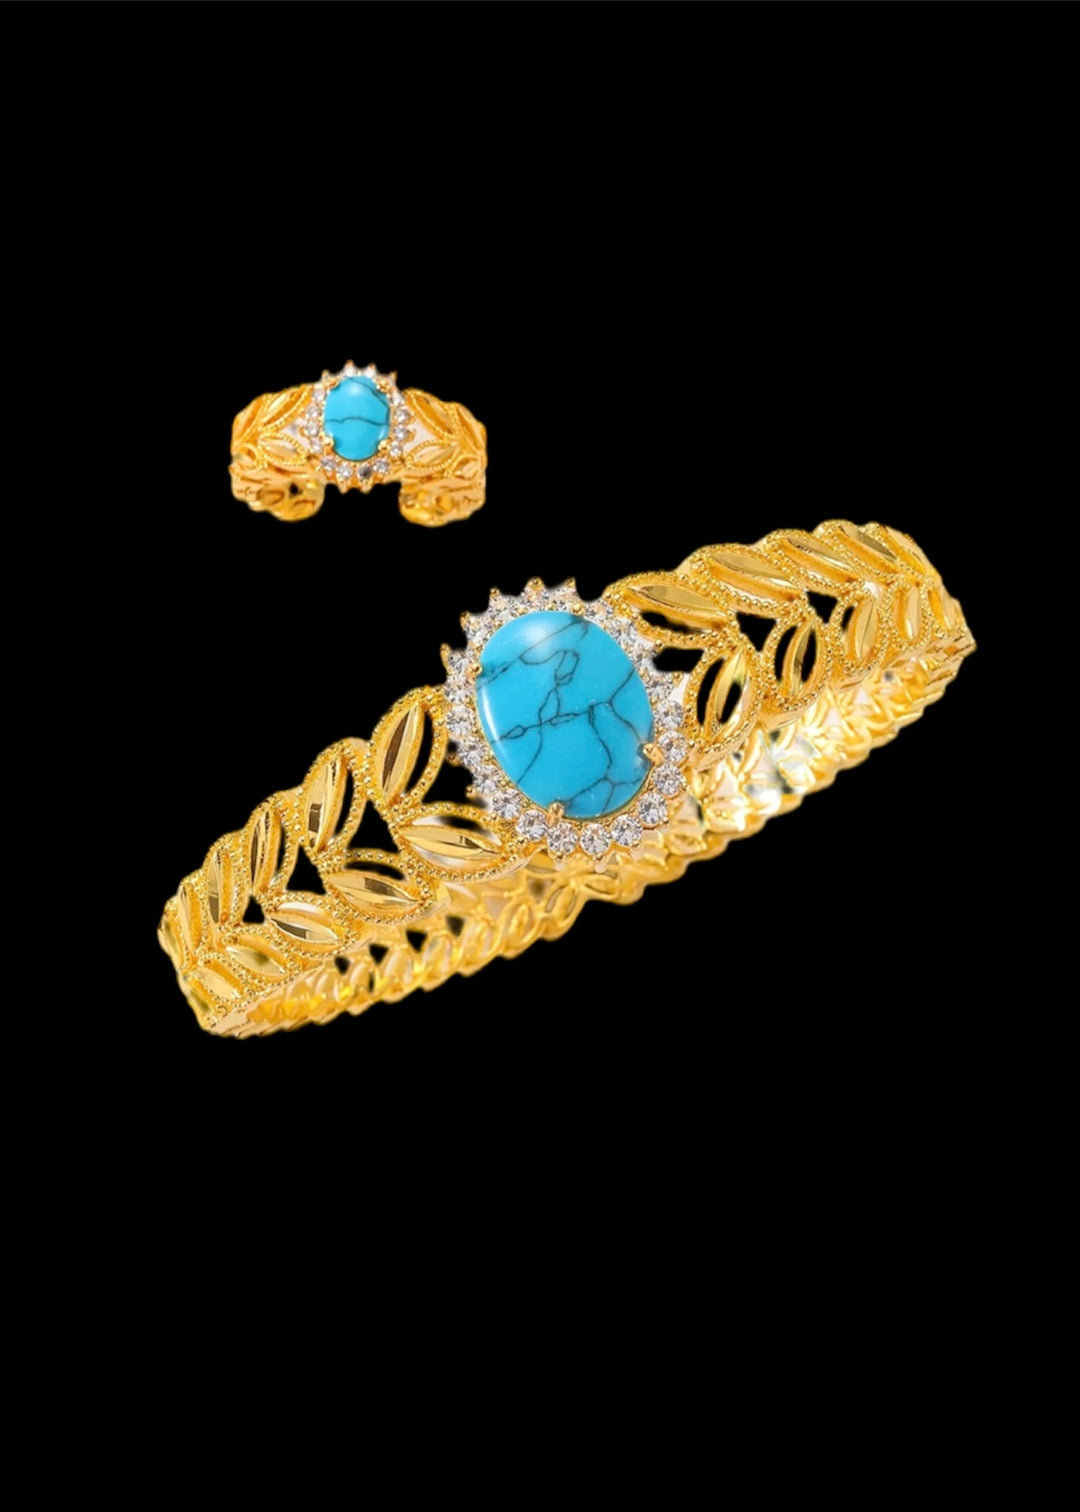 2pcs Bracelet Plus Ring Tribal Jewelry Set Trendy Leaf Design Inlaid Turquoise 18k Gold Plated Match Daily Outfits